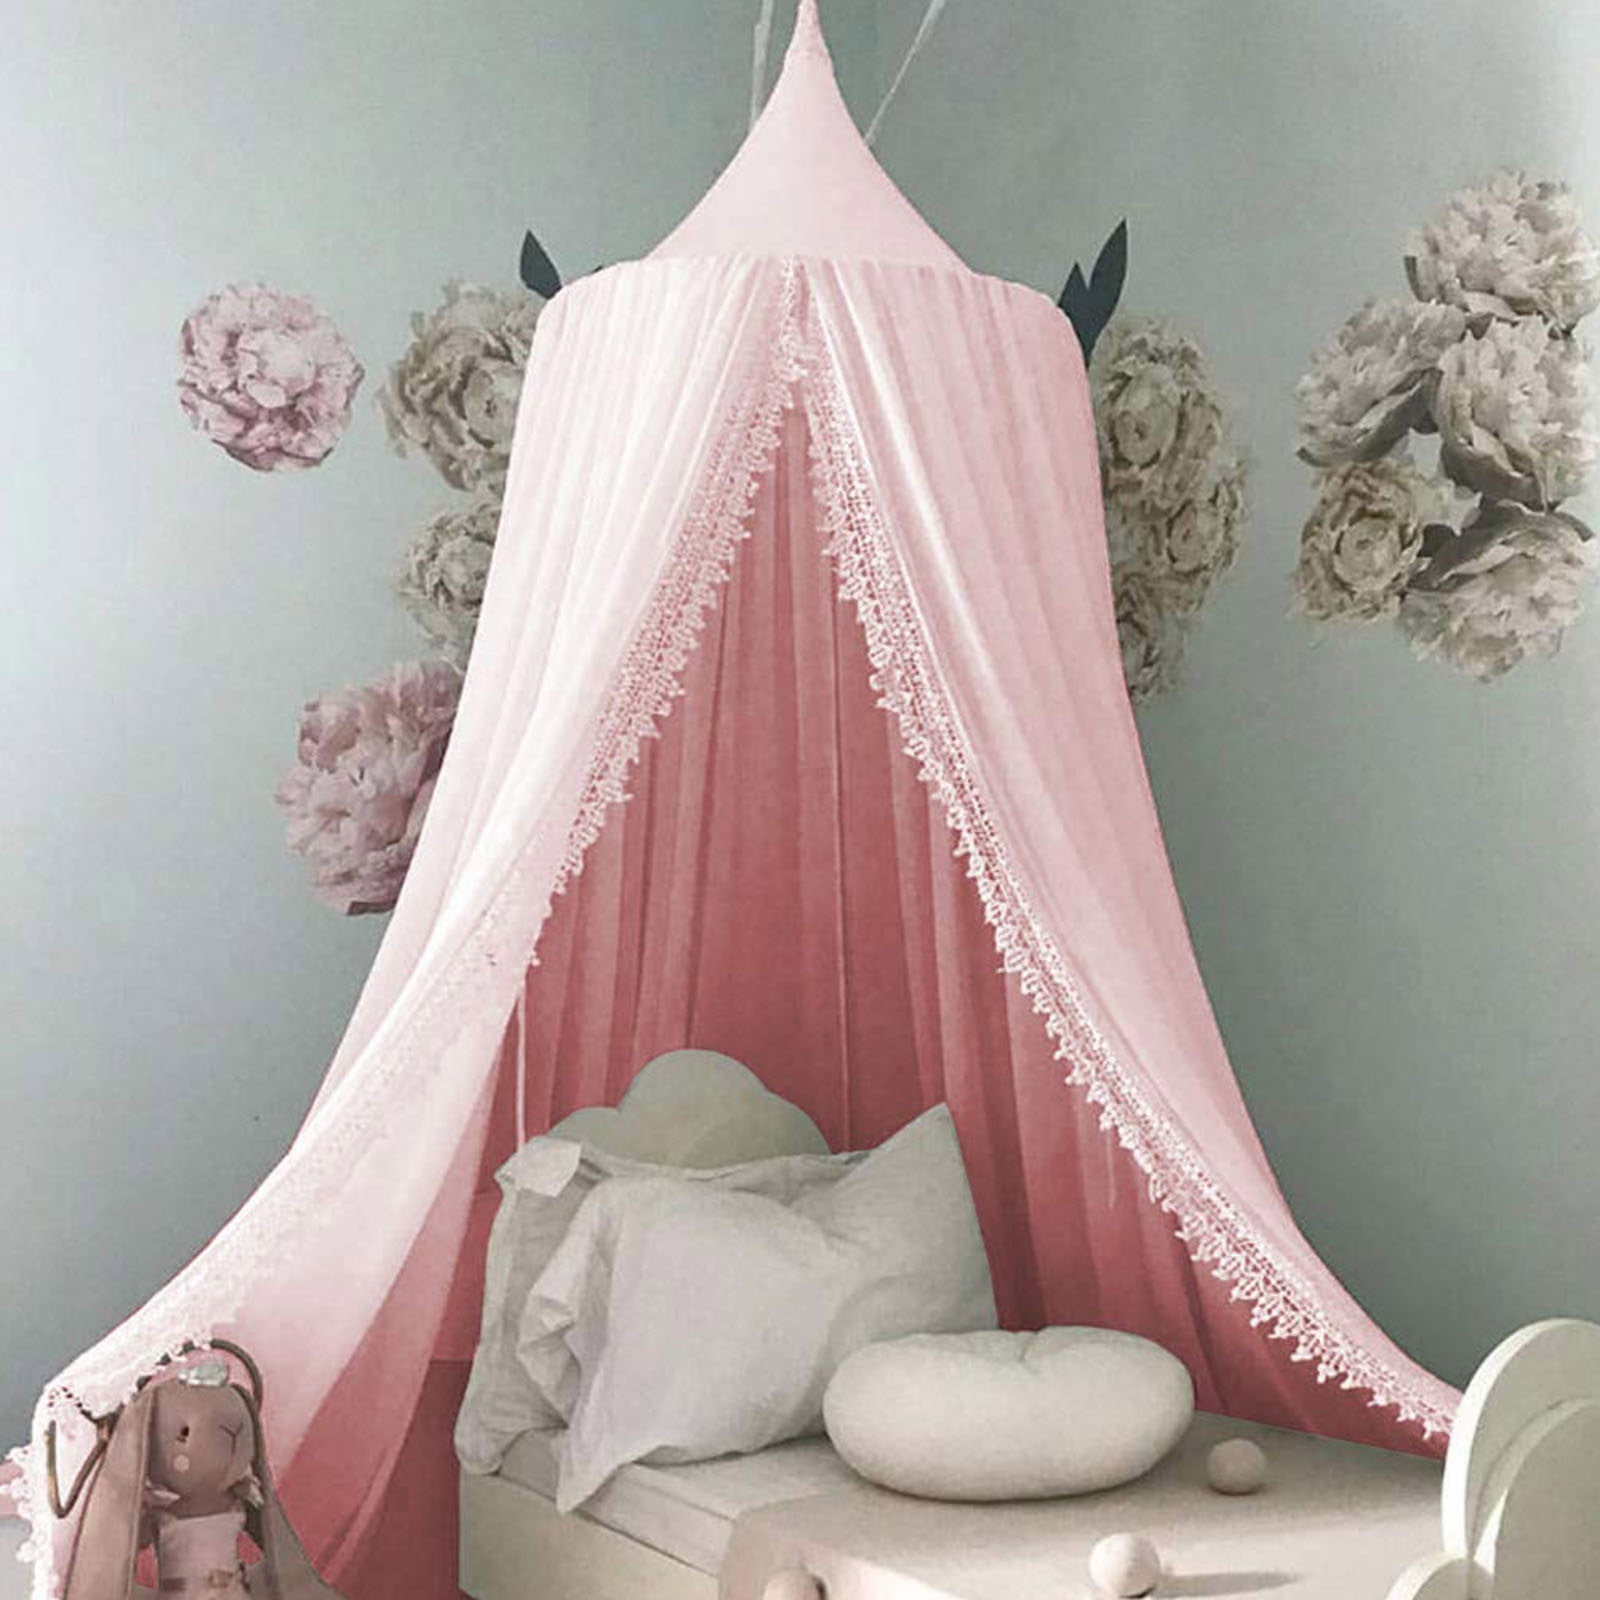 Secret House Girls Bed Tent Full Pink Purple Star Moon Castle Dome Canopy Play 